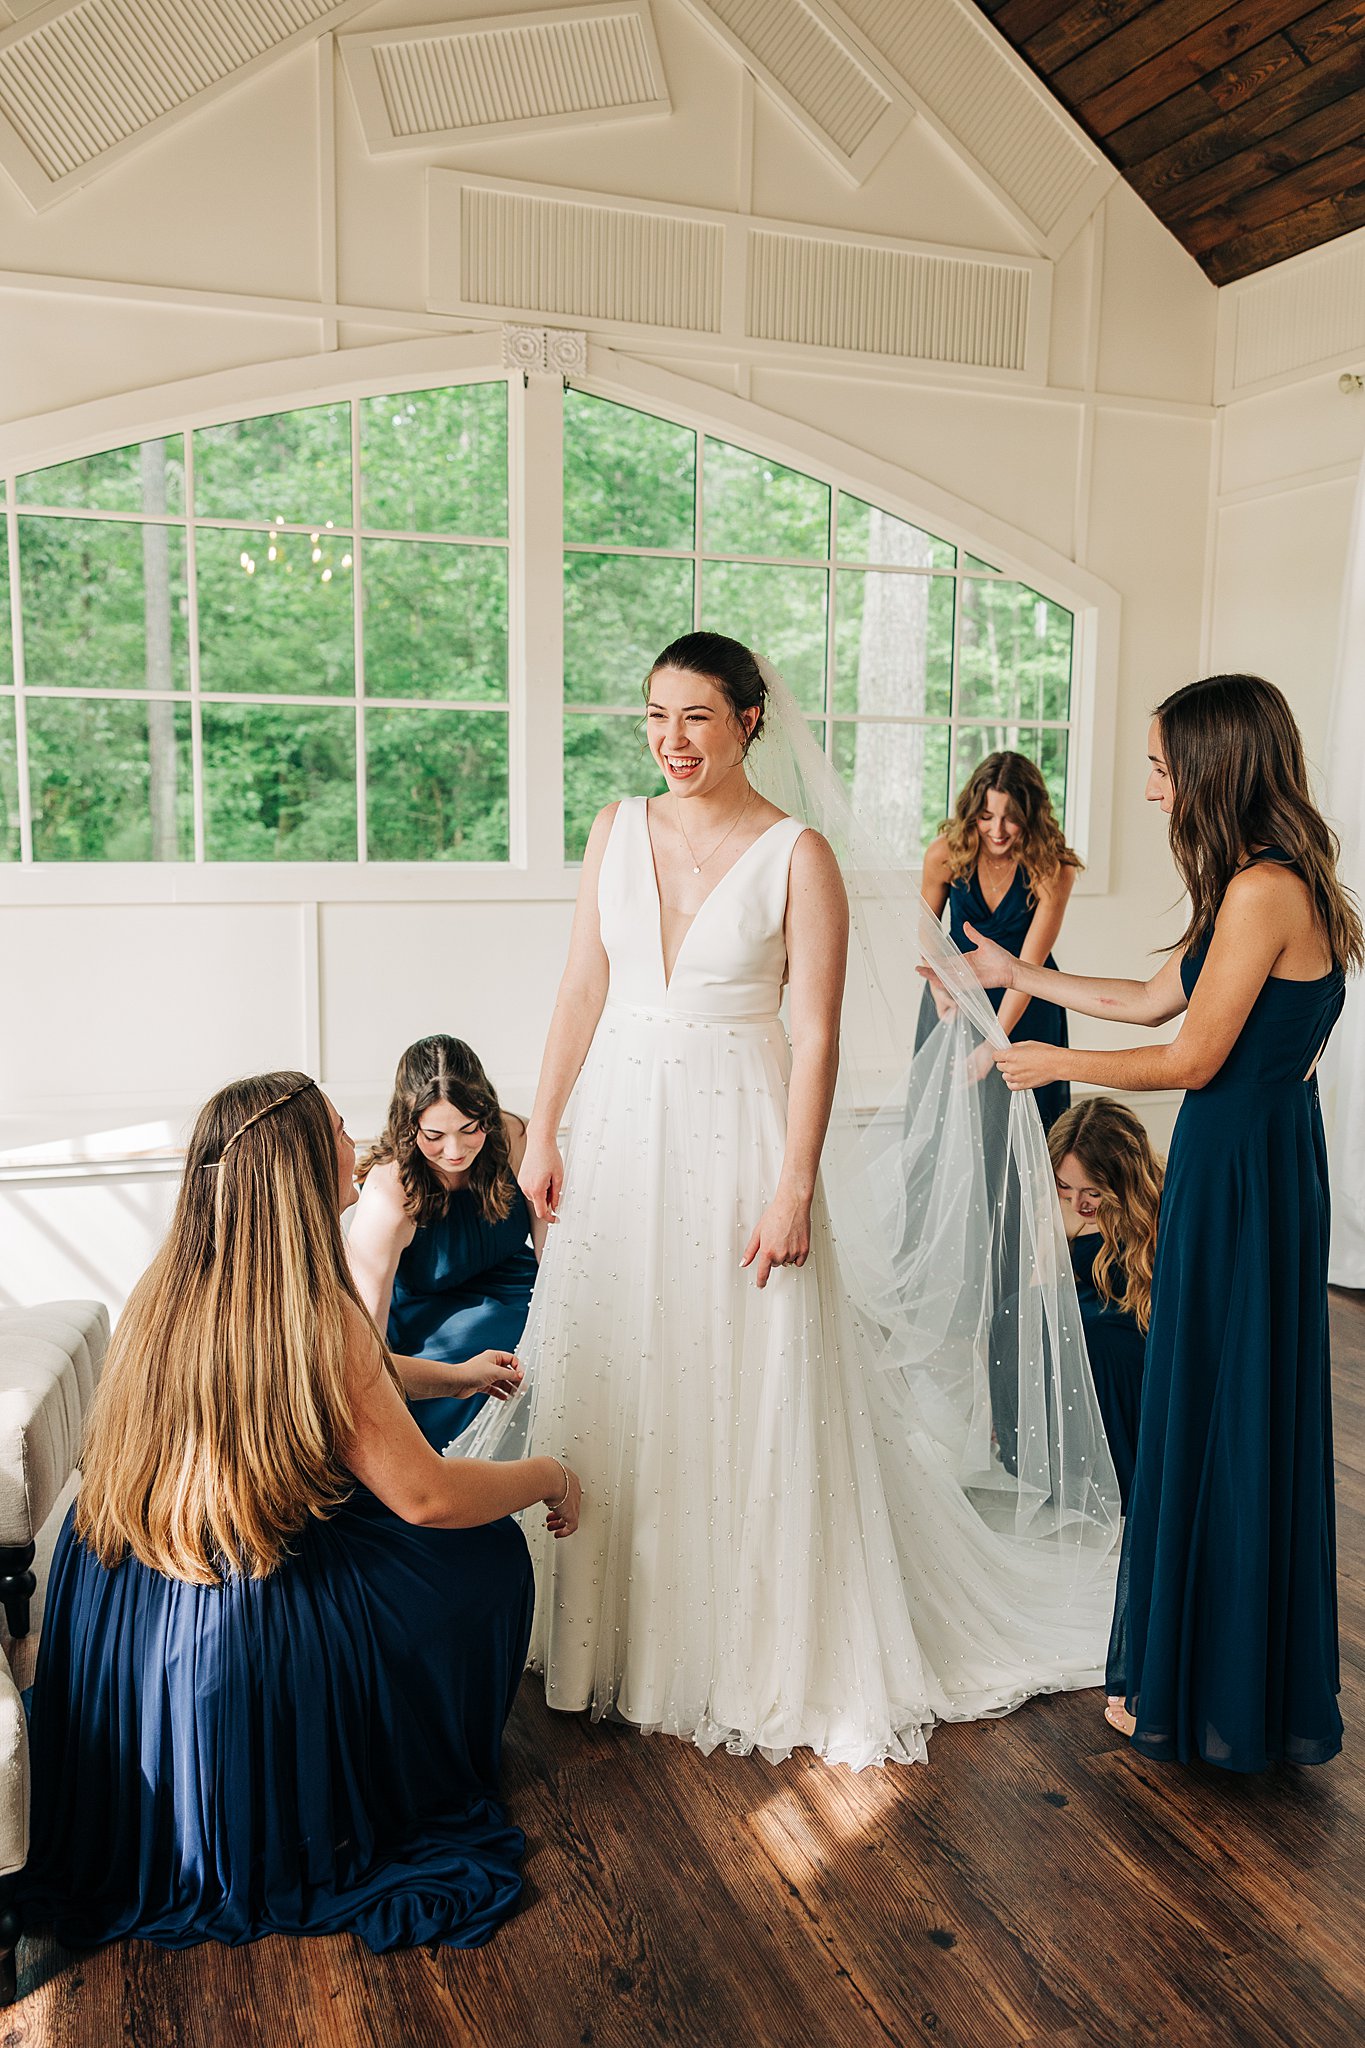 A happy bride stands in the center of a large room while her bridesmaids admire her dress at her pinehill pavilion wedding